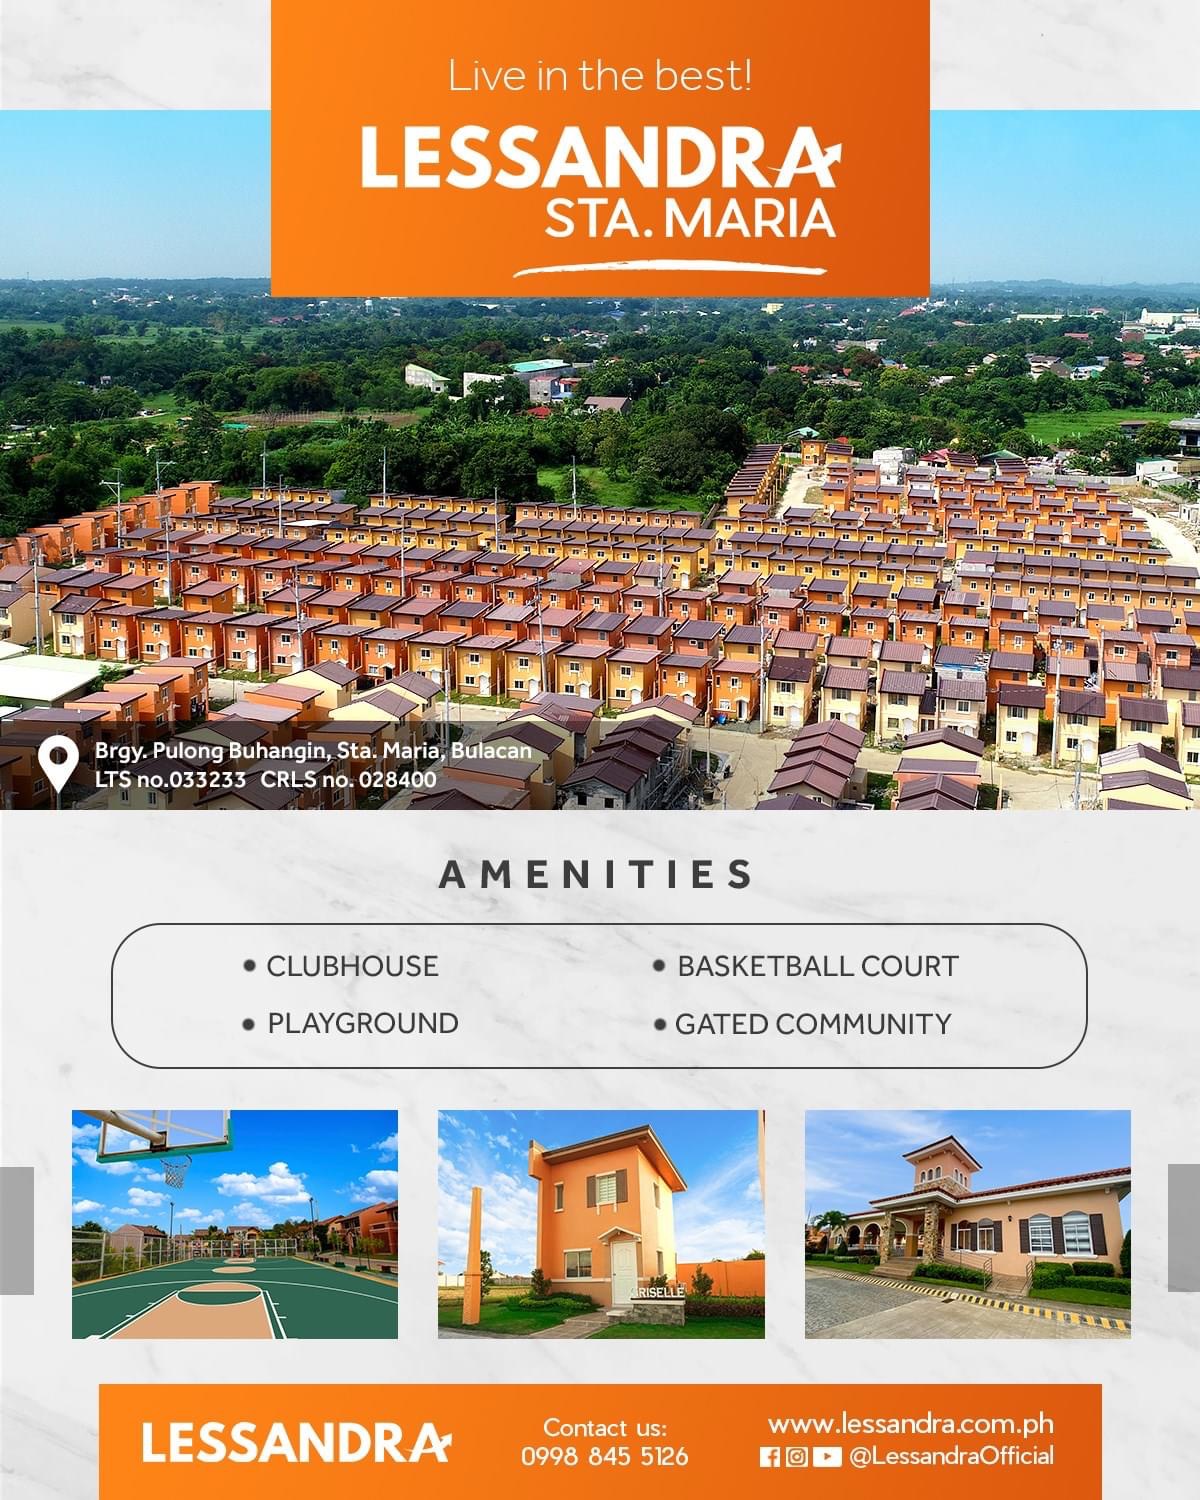 Live in the best home! Lessandra Sta. Maria is a maaliwalas community offering the best quality and affordable house and lots in Sta. Maria, Bulacan.  